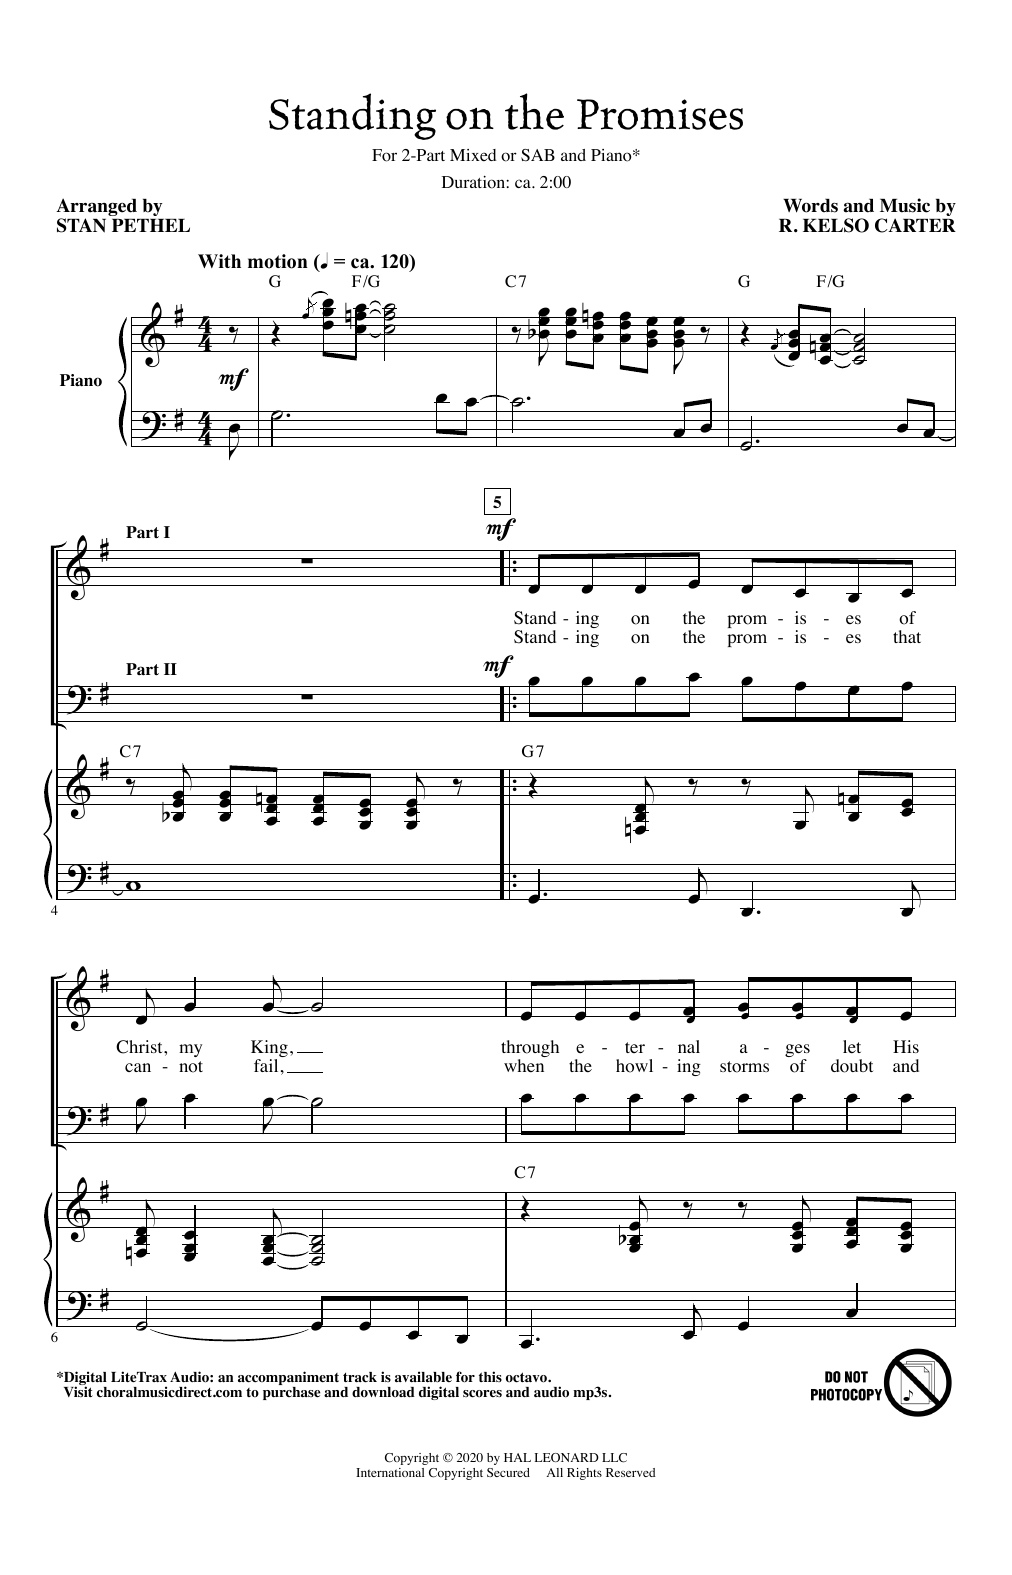 R. Kelso Carter Standing On The Promises (arr. Stan Pethel) sheet music preview music notes and score for Choir including 6 page(s)